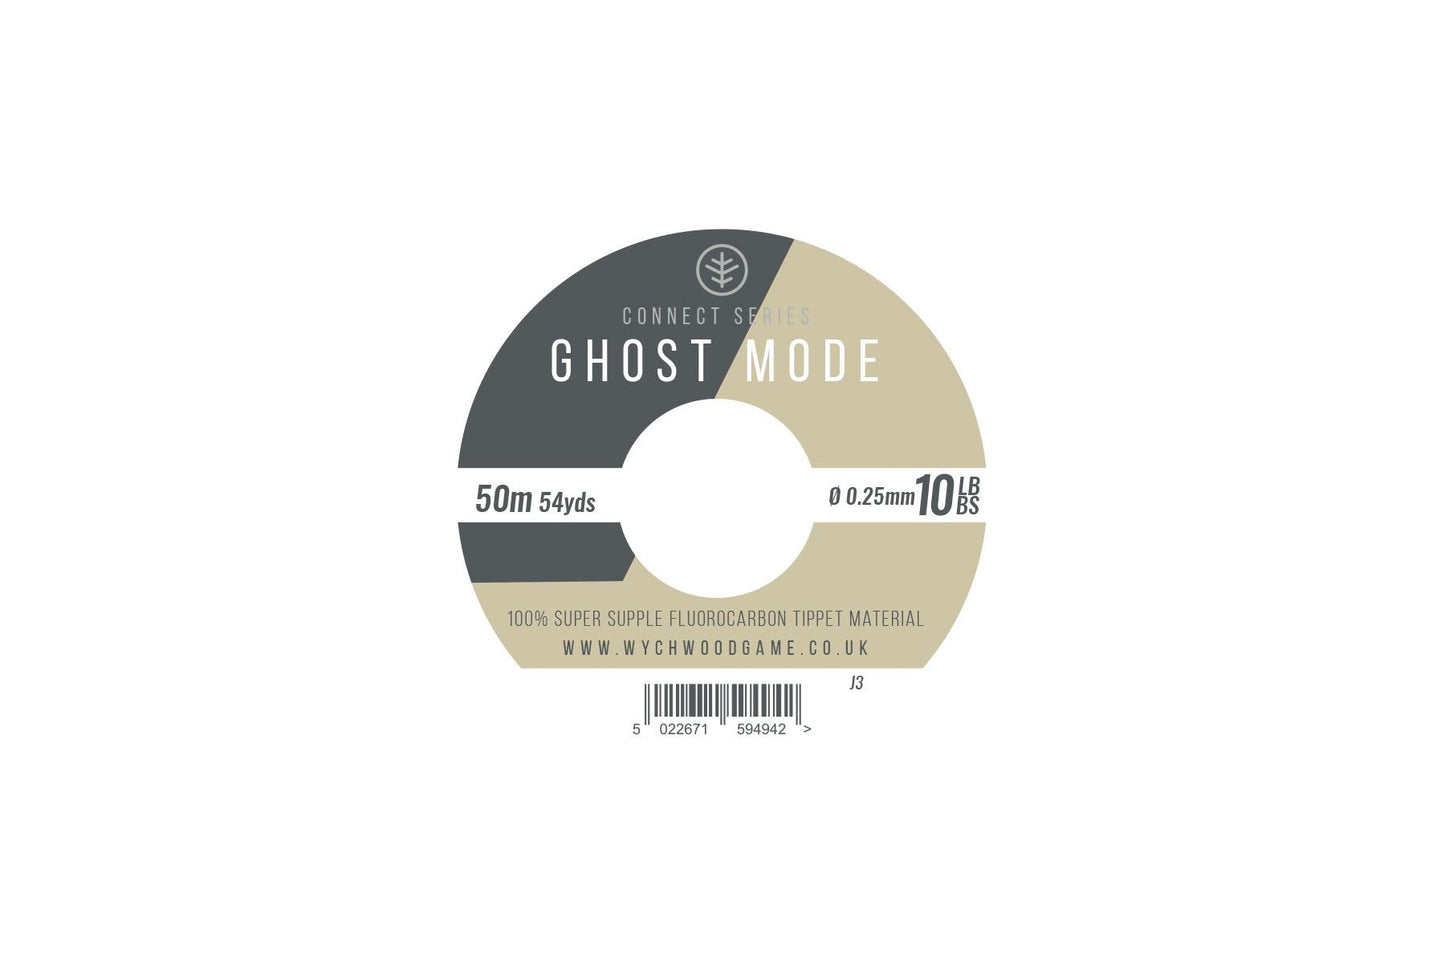 Wychwood Ghost Mode Fluorocarbon 50m Tippet 10lb